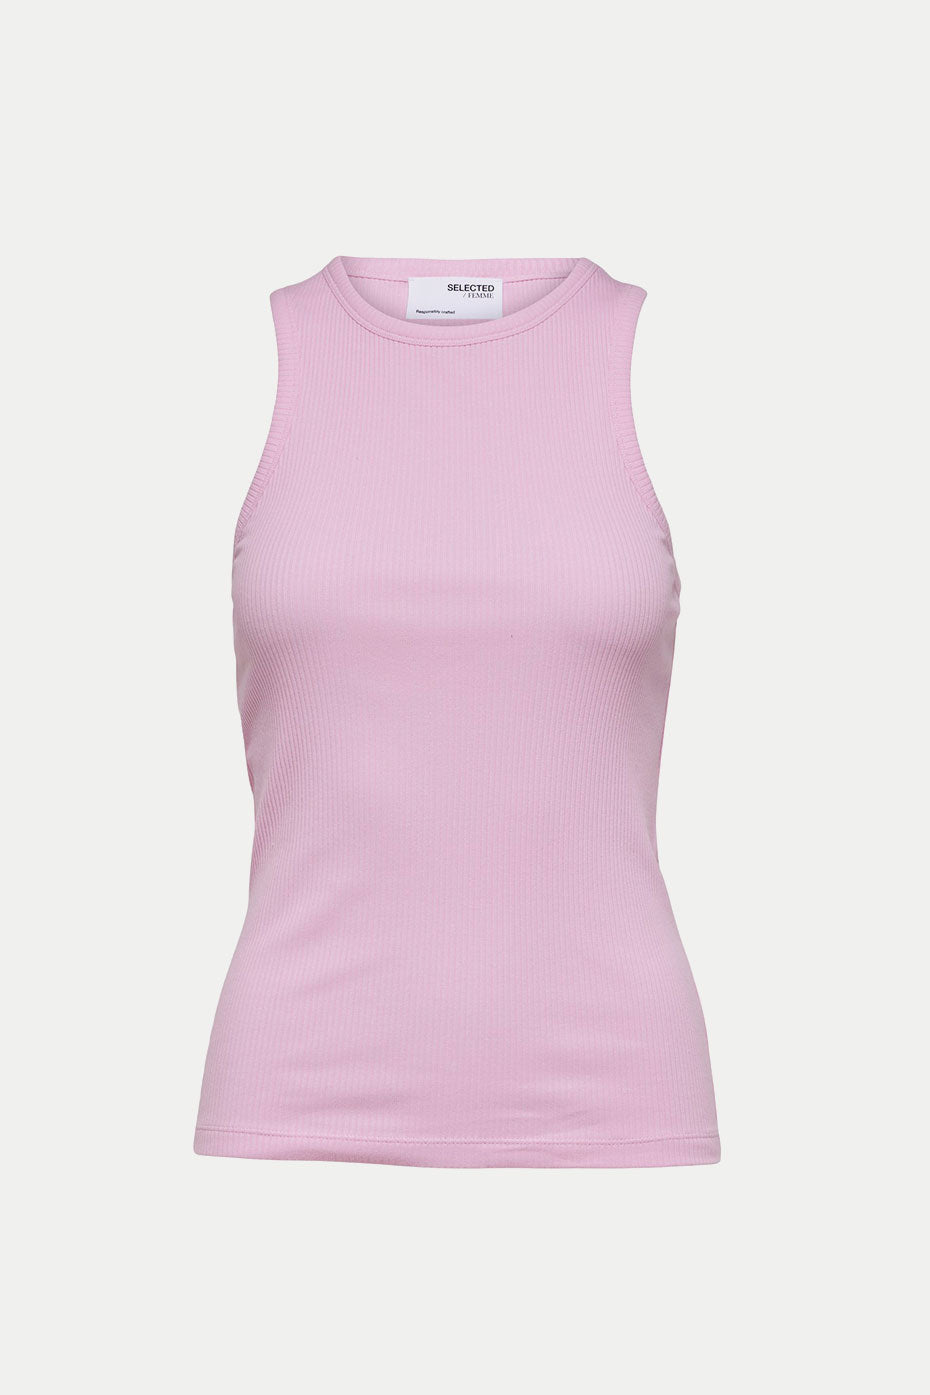 Selected Femme Sweet Lilac Anna Tank Top